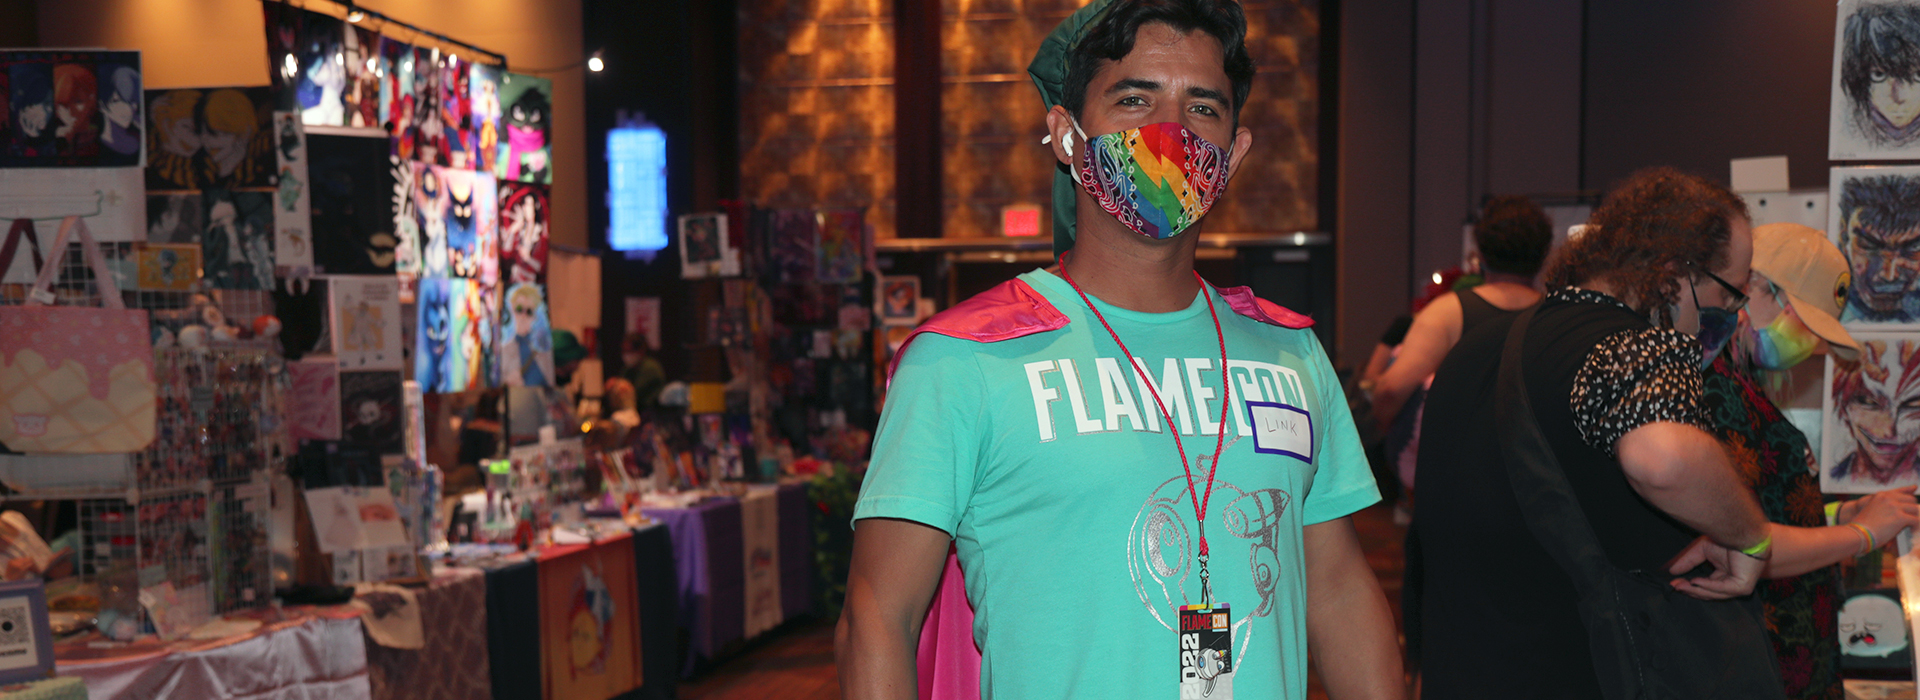 A Flame Con volunteer posing on the main convention floor.